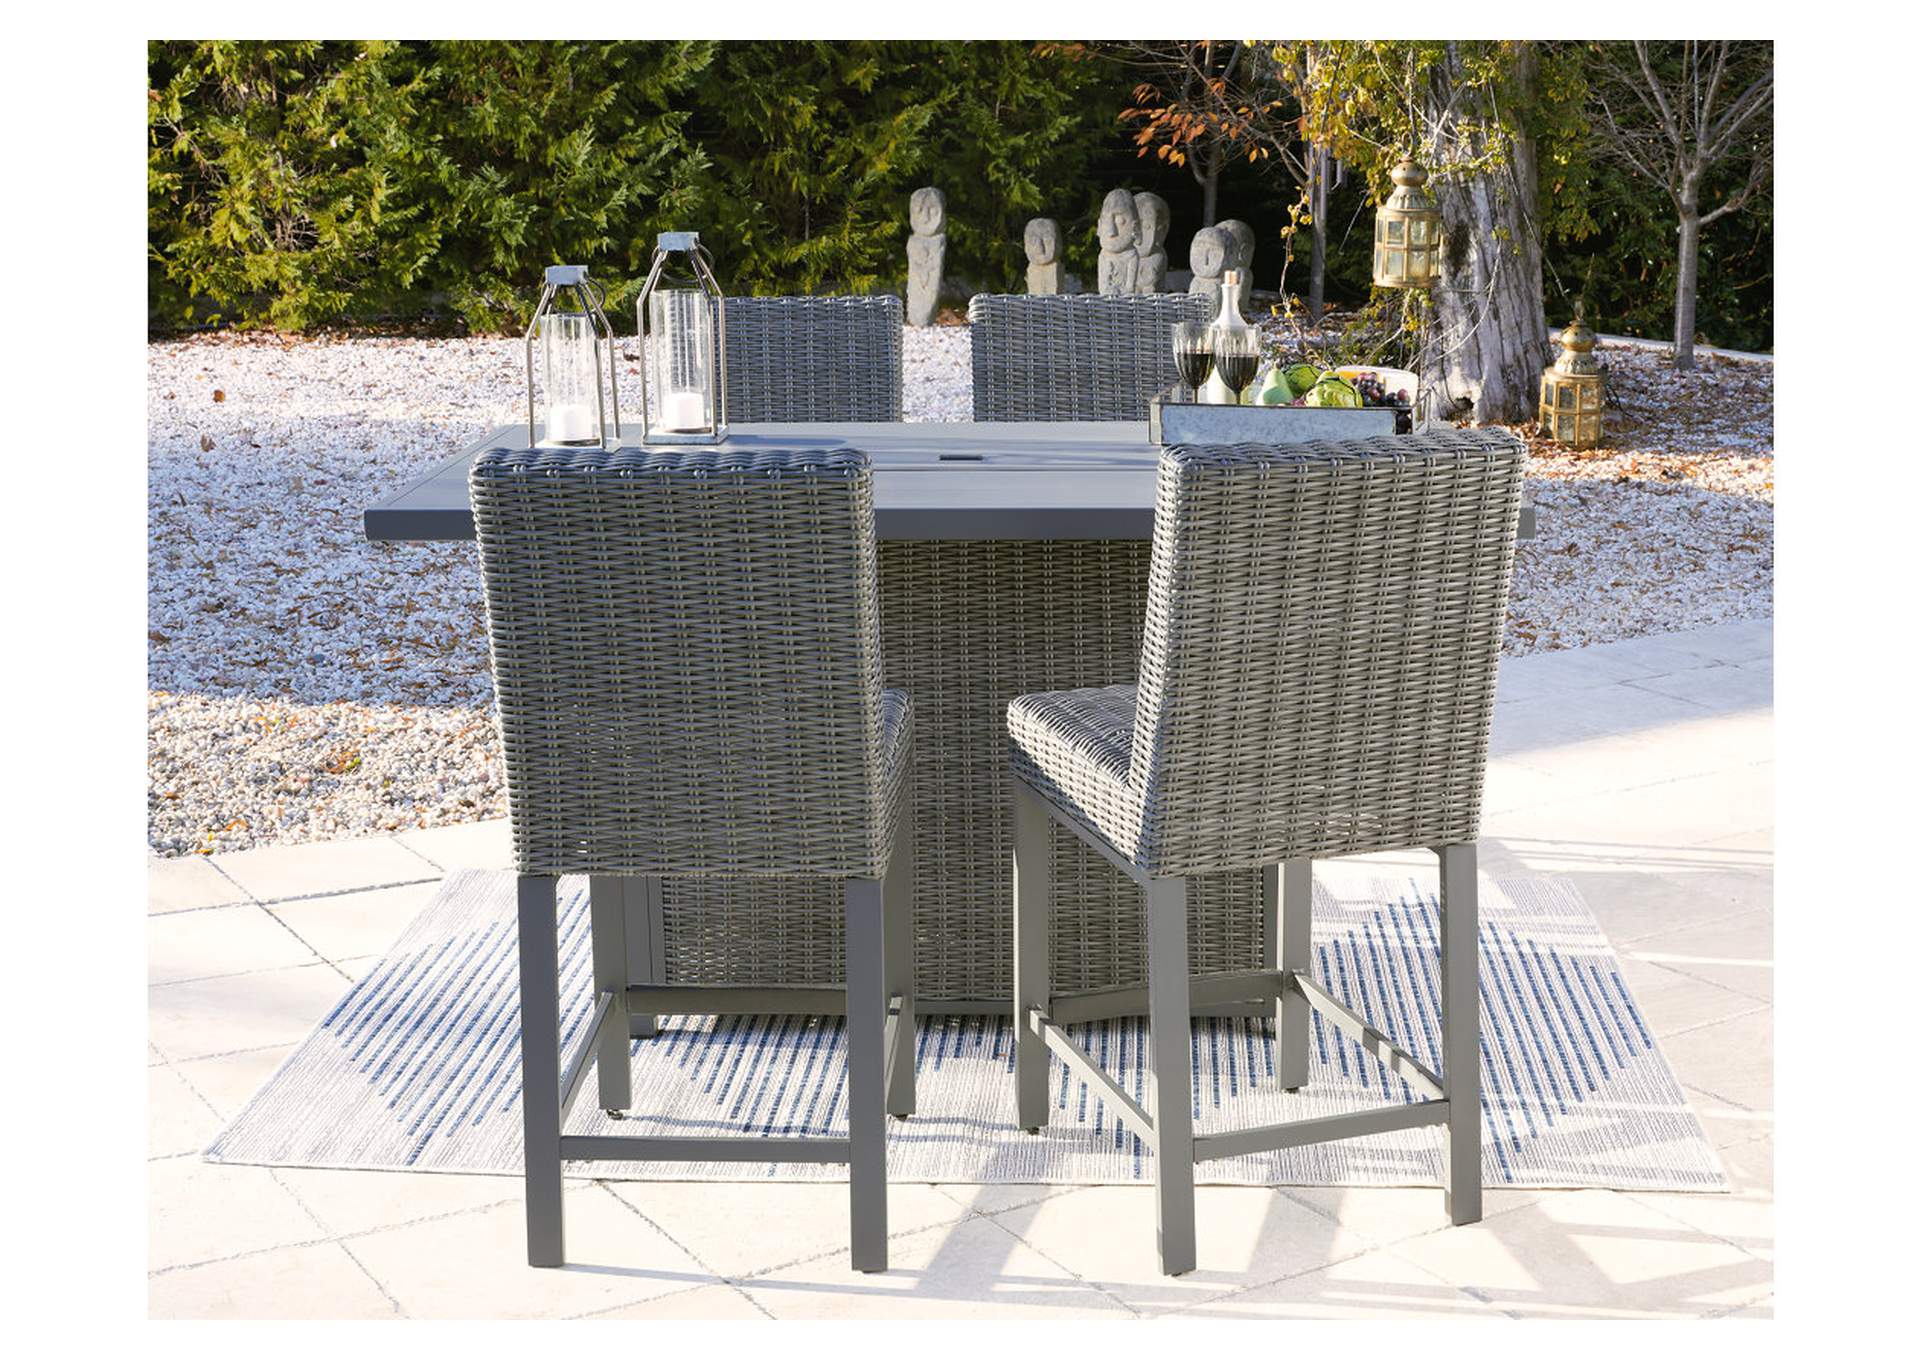 Palazzo Outdoor Counter Height Dining Table with 4 Barstools,Outdoor By Ashley